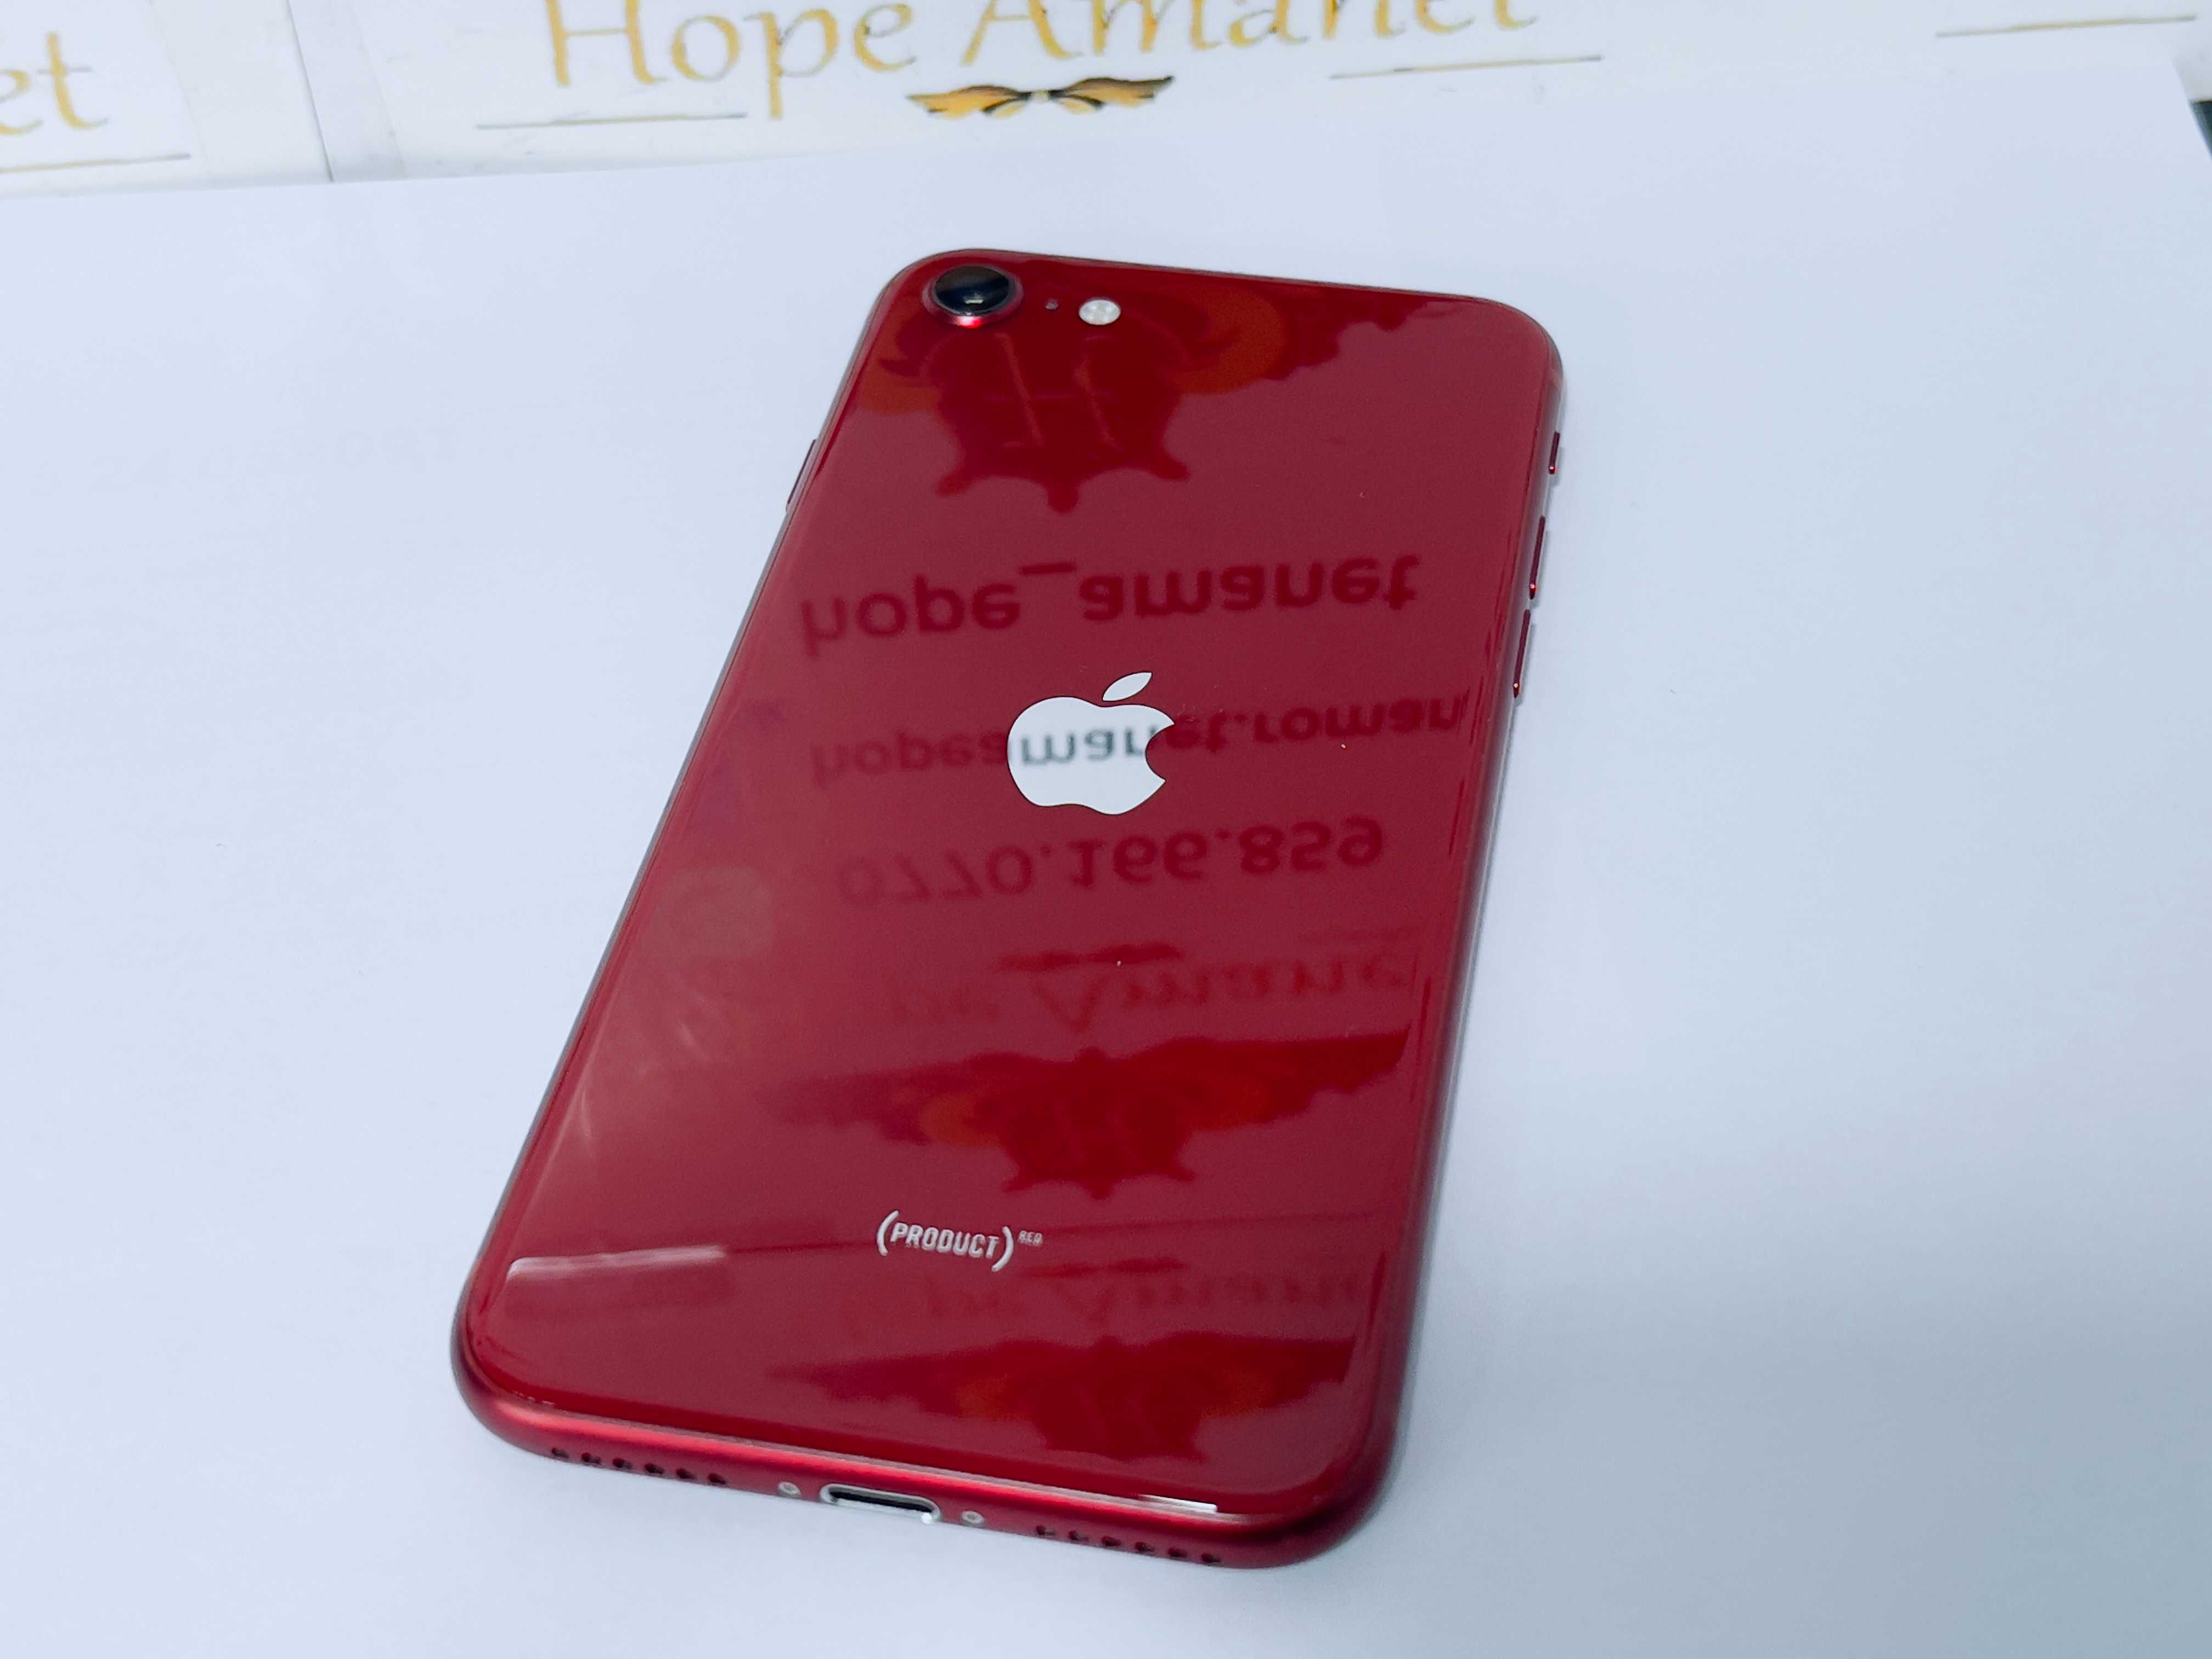 Hope Amanet P10/iPhone SE 3 64GB RED